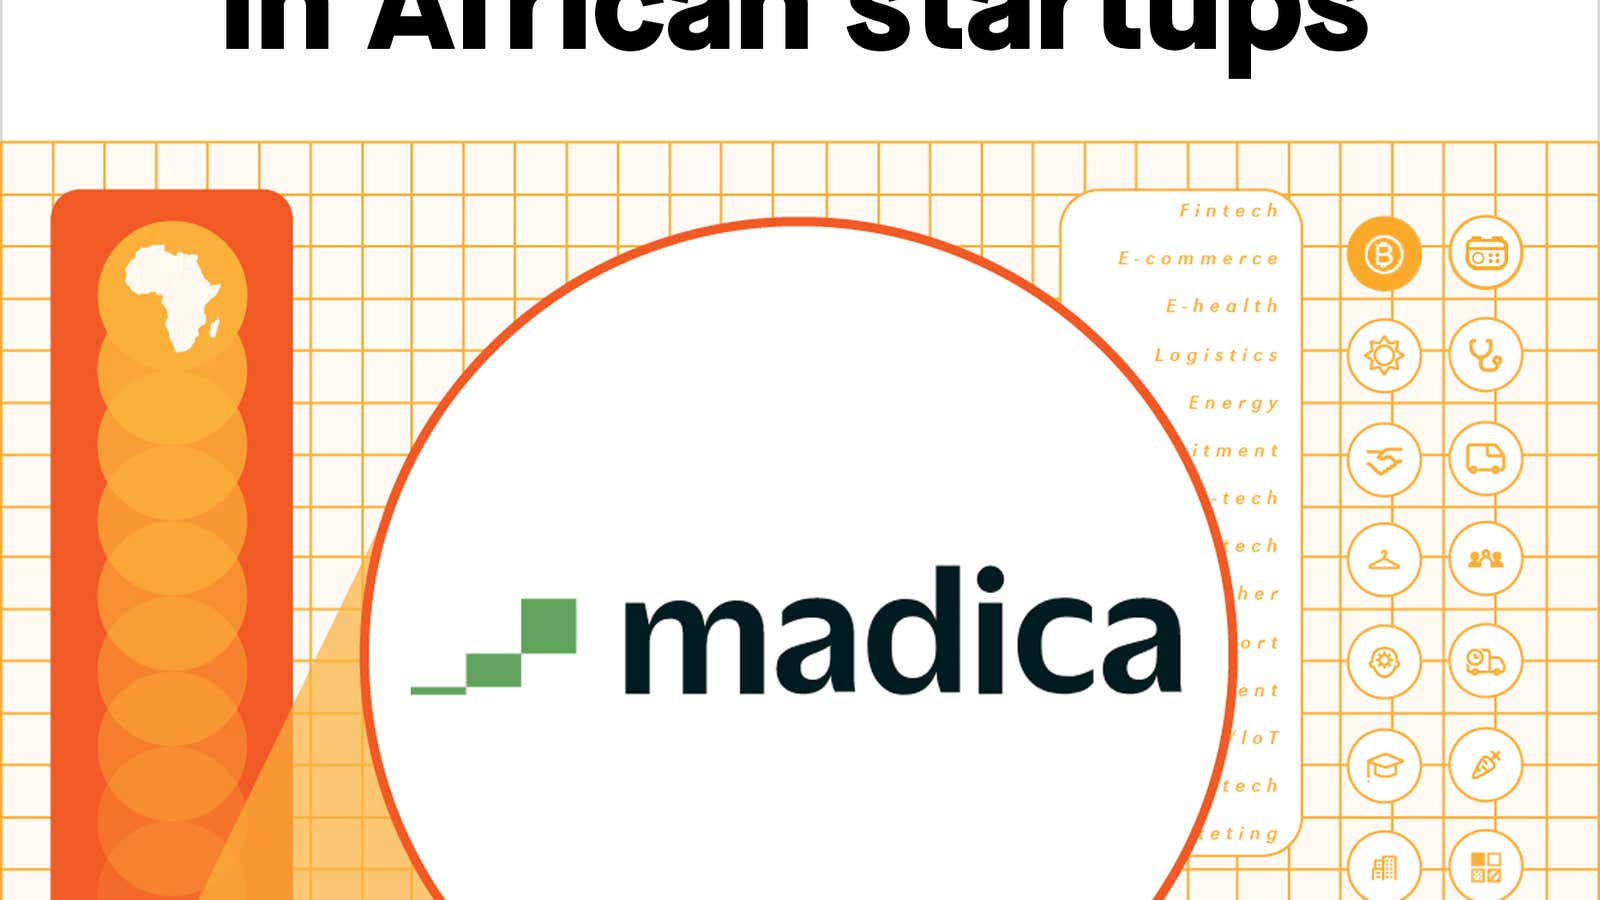 âœ¦ A new way to invest in African startups